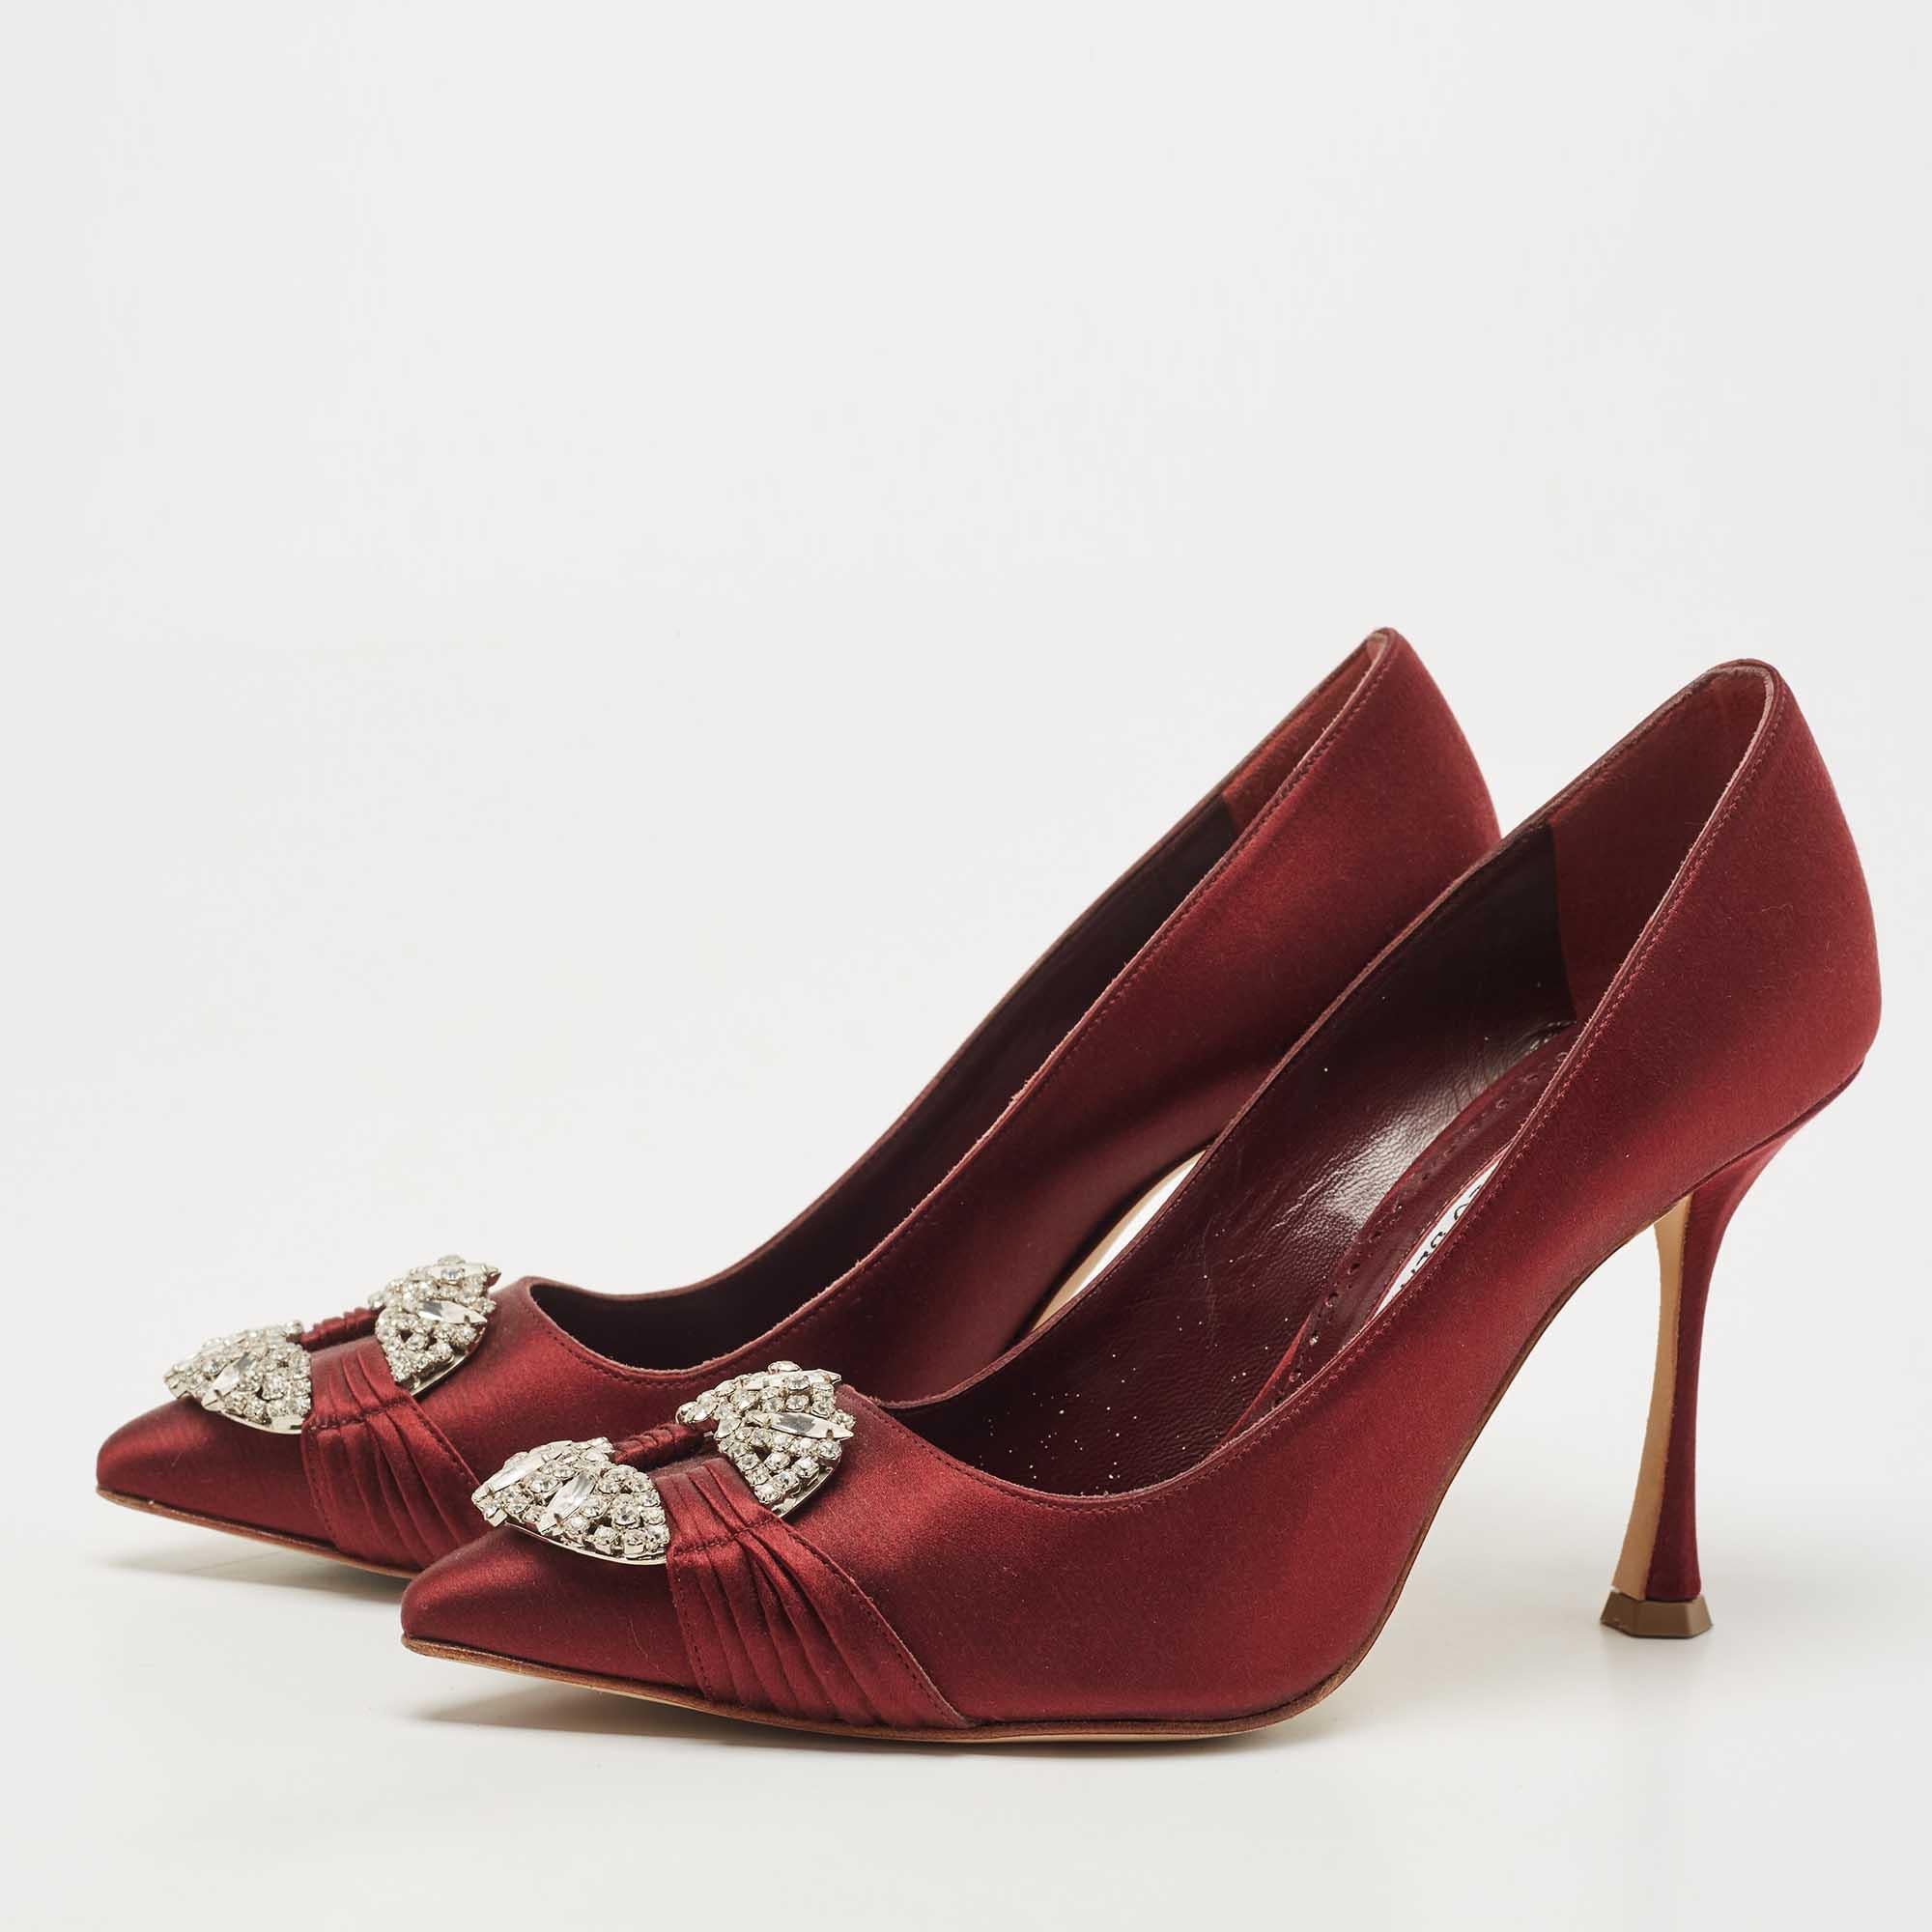 The refined feminine style is reflected in this pair of Manolo Blahnik pumps. Crafted from satin, the crystal embellishment at the front shows the brand's regard for glamour and luxury. The 11cm heels of these shoes will elevate you with ease.

